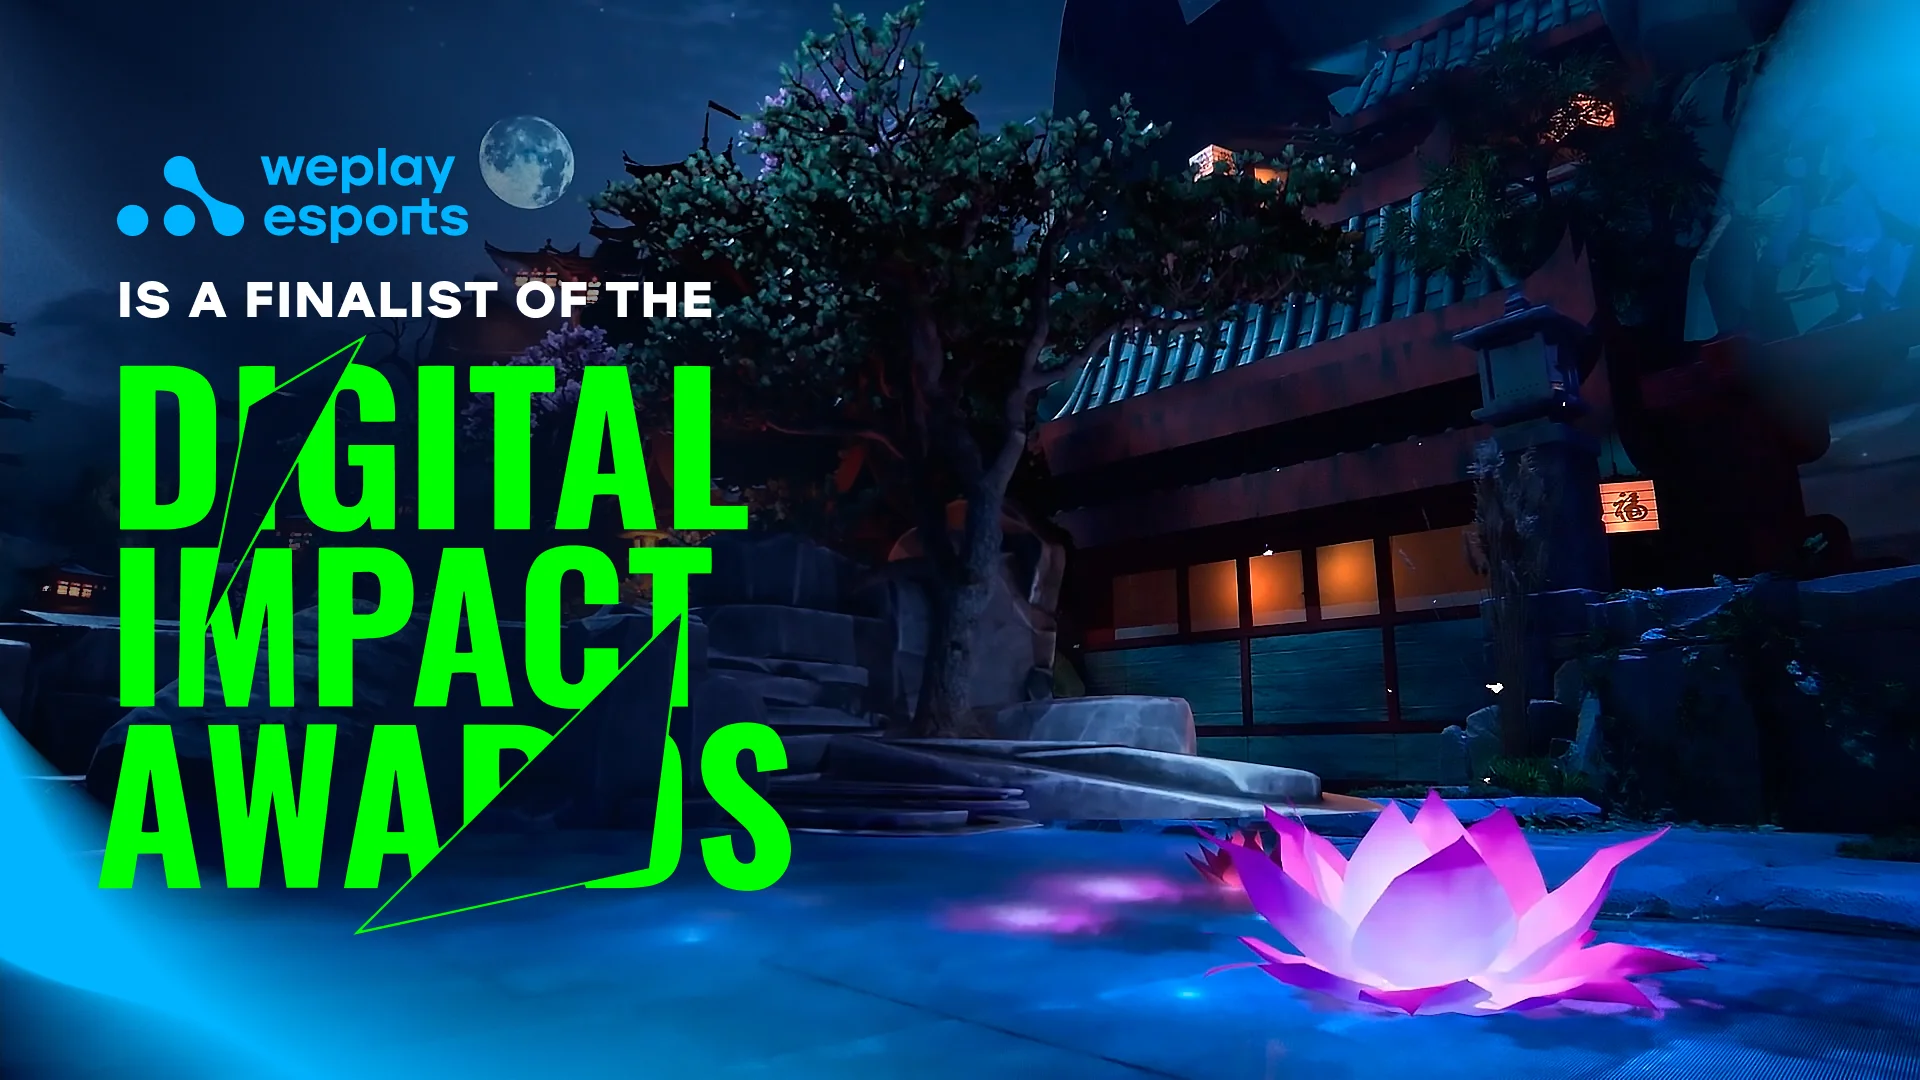 WePlay Esports is a finalist of the Digital Impact Awards. Visual: WePlay Holding